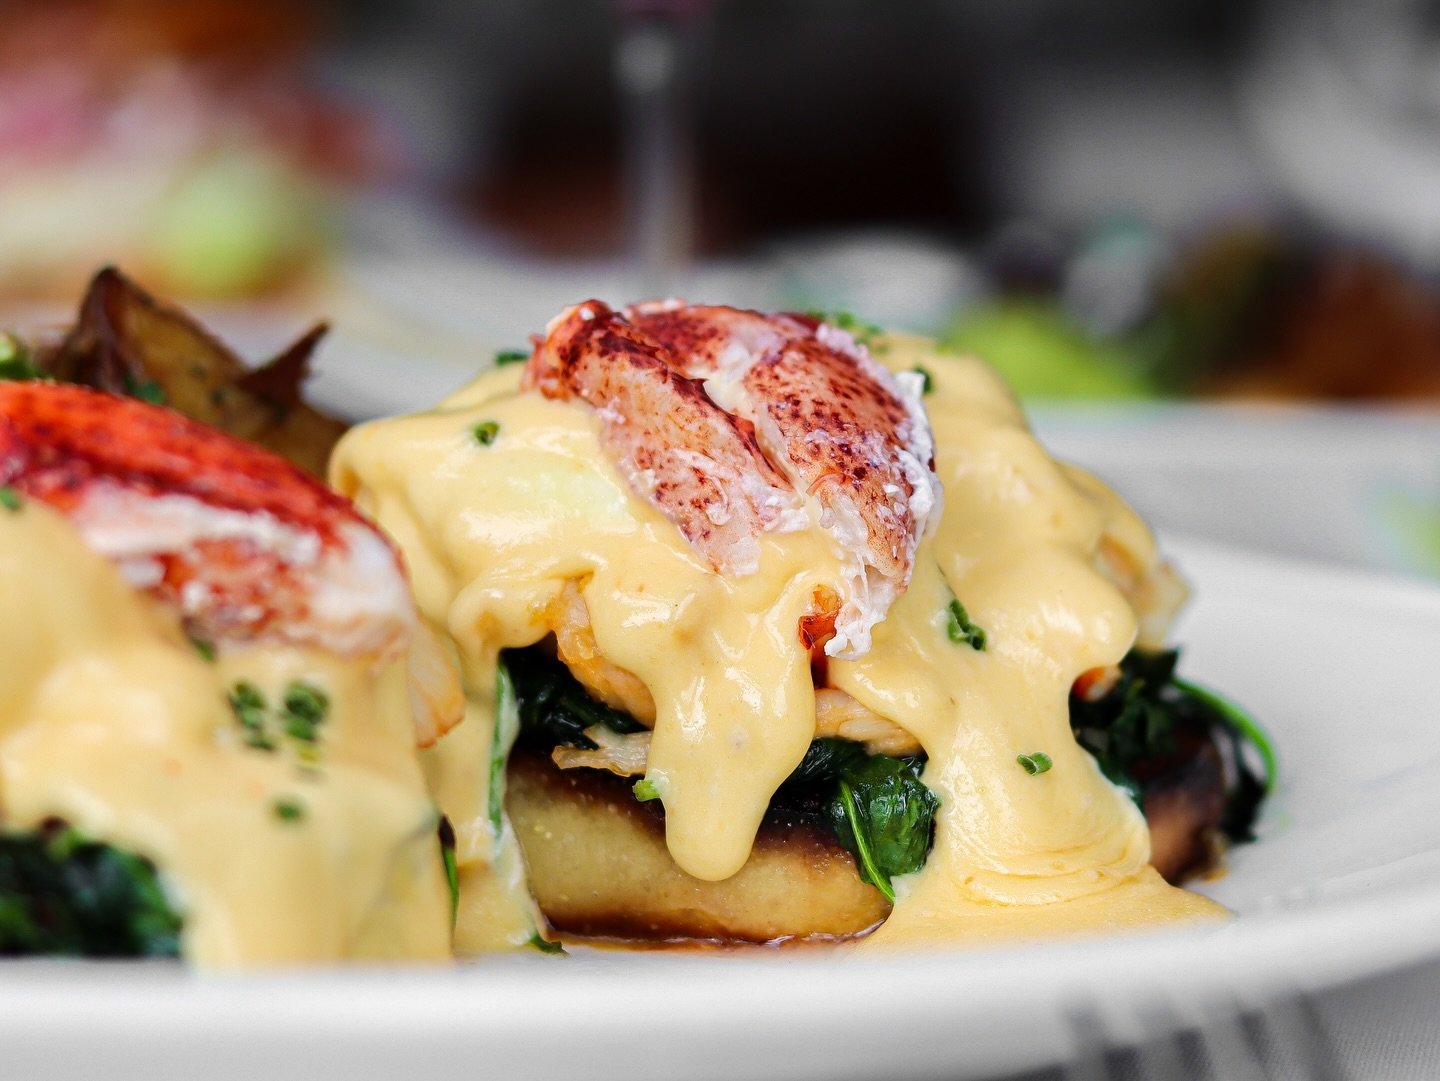 Our weekend brunch is also available Saturdays. Reservations available via @OpenTable. 🦞 🍳 

Pictured: Lobster Benedict
(spinach, saffron hollandaise)

#Brunch #WeekendBrunch #LobsterBenedict